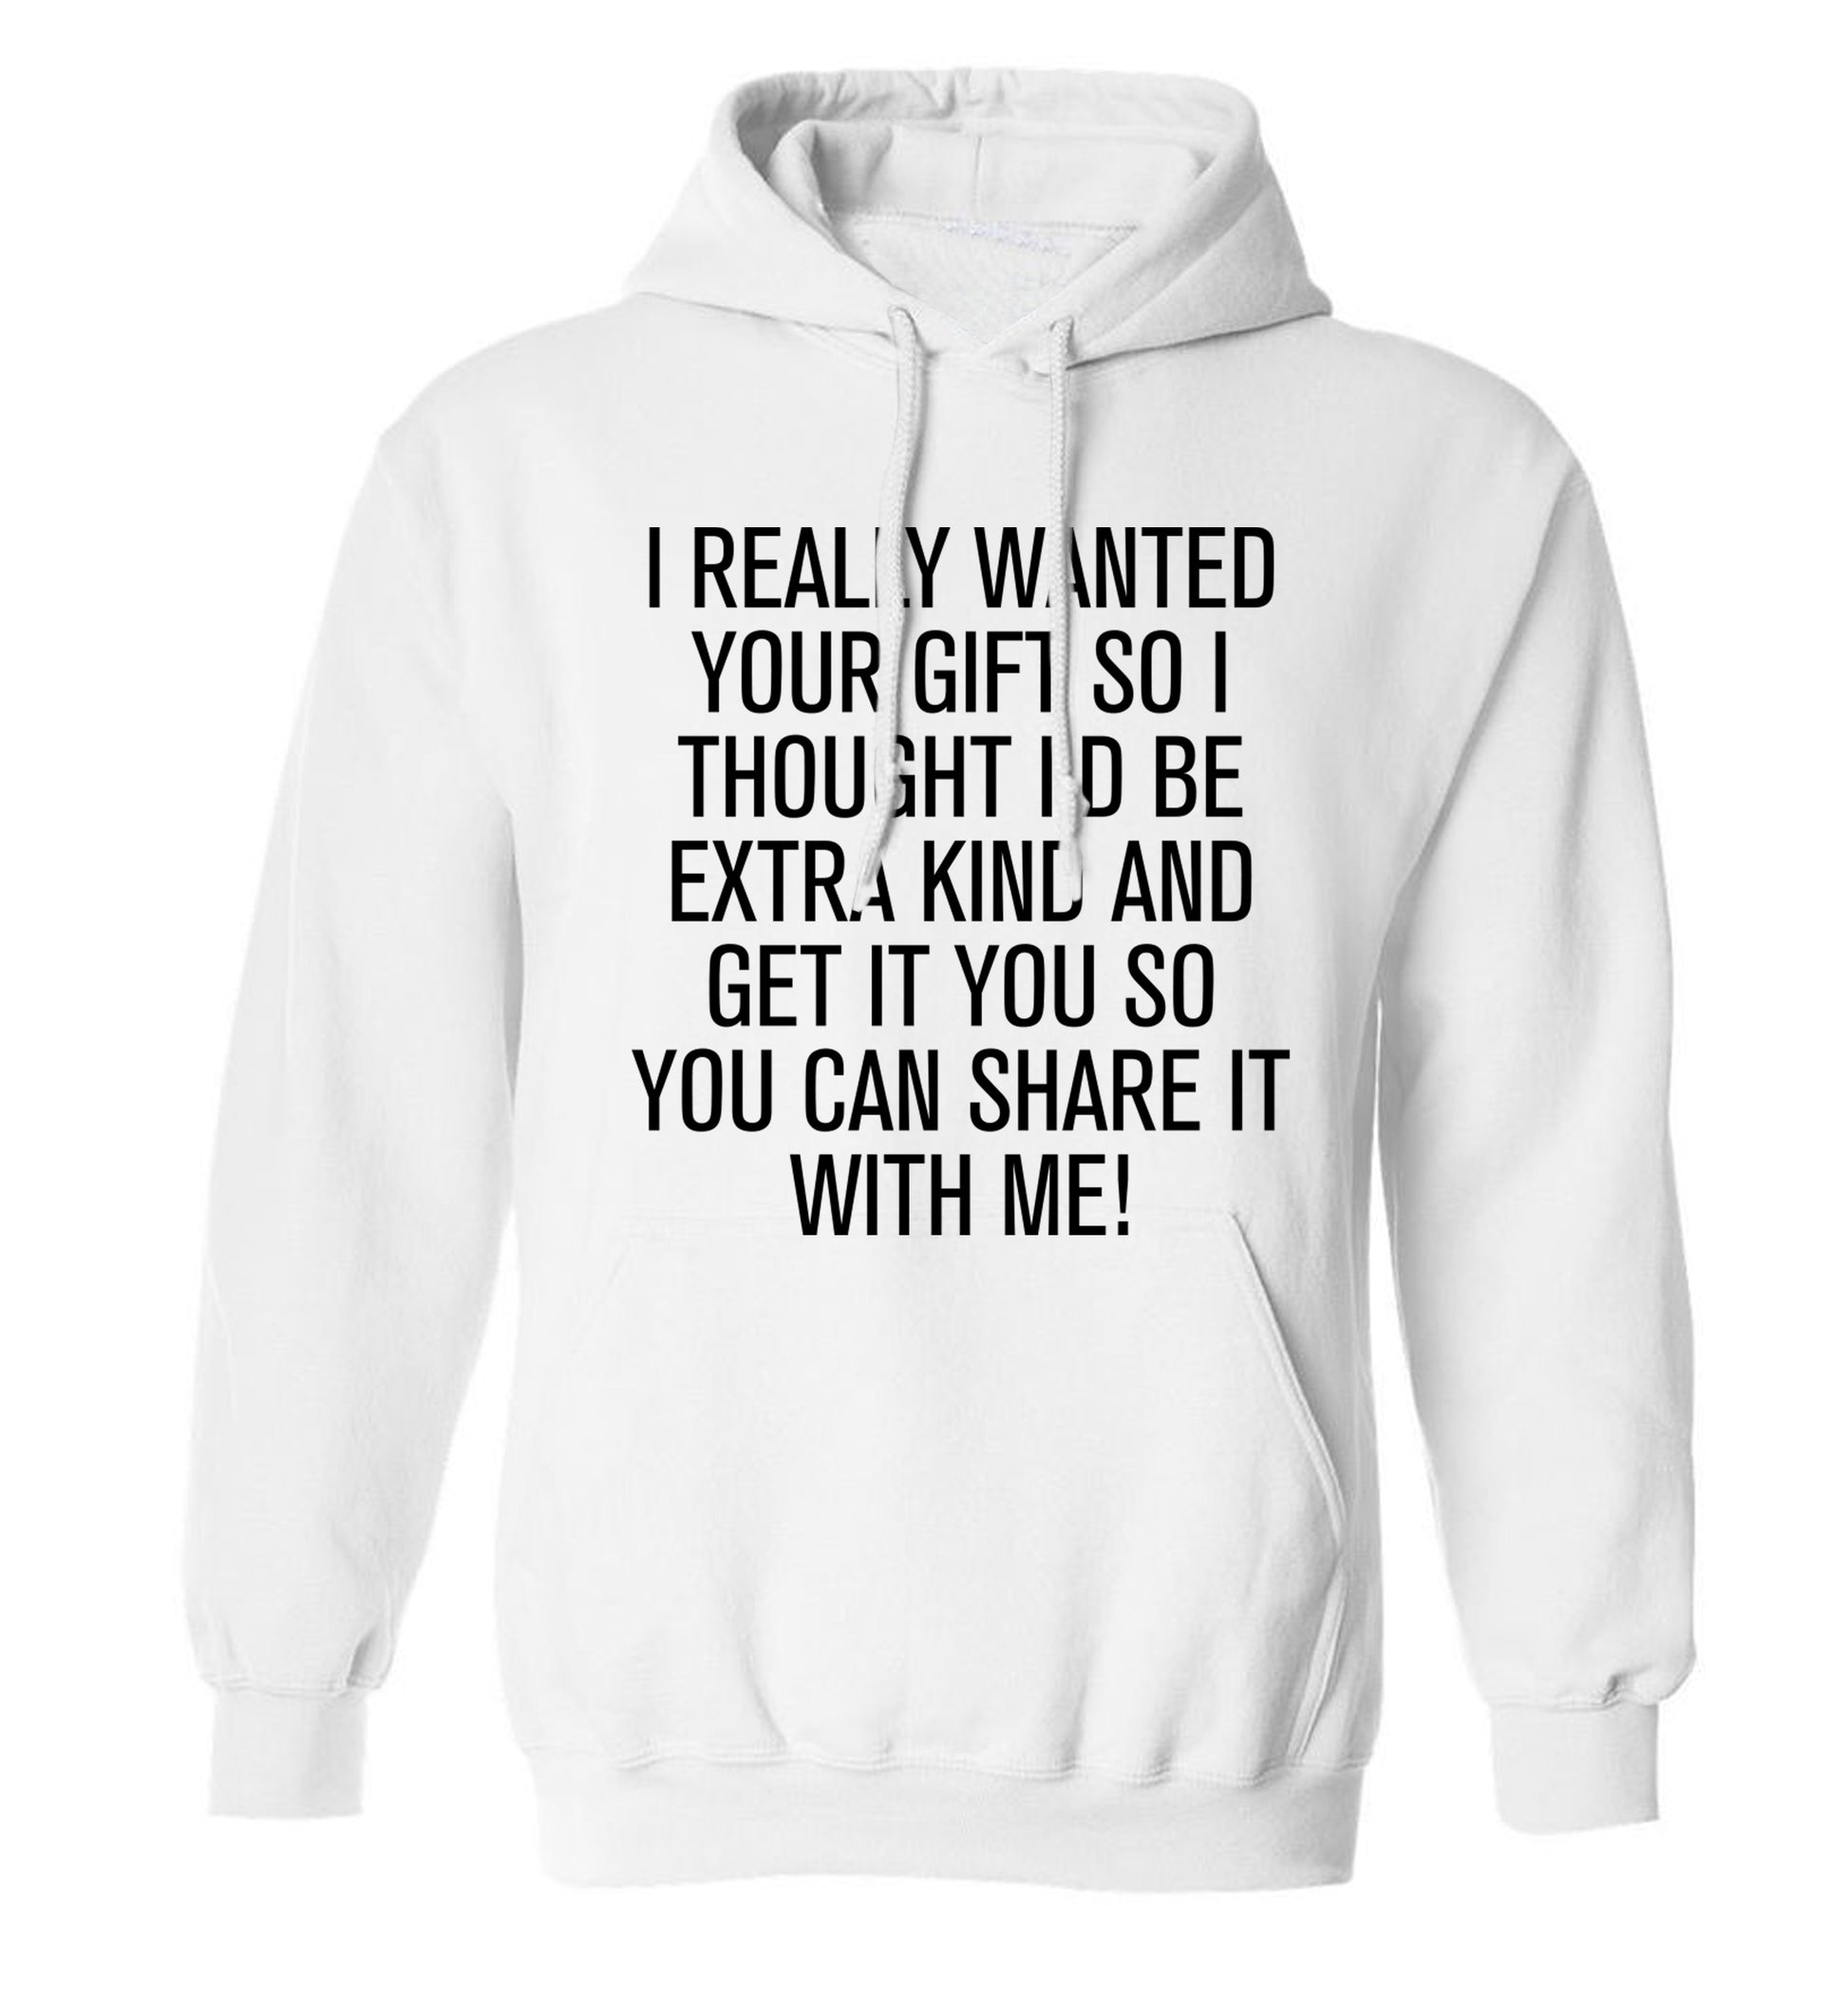 I really wanted your gift adults unisex white hoodie 2XL